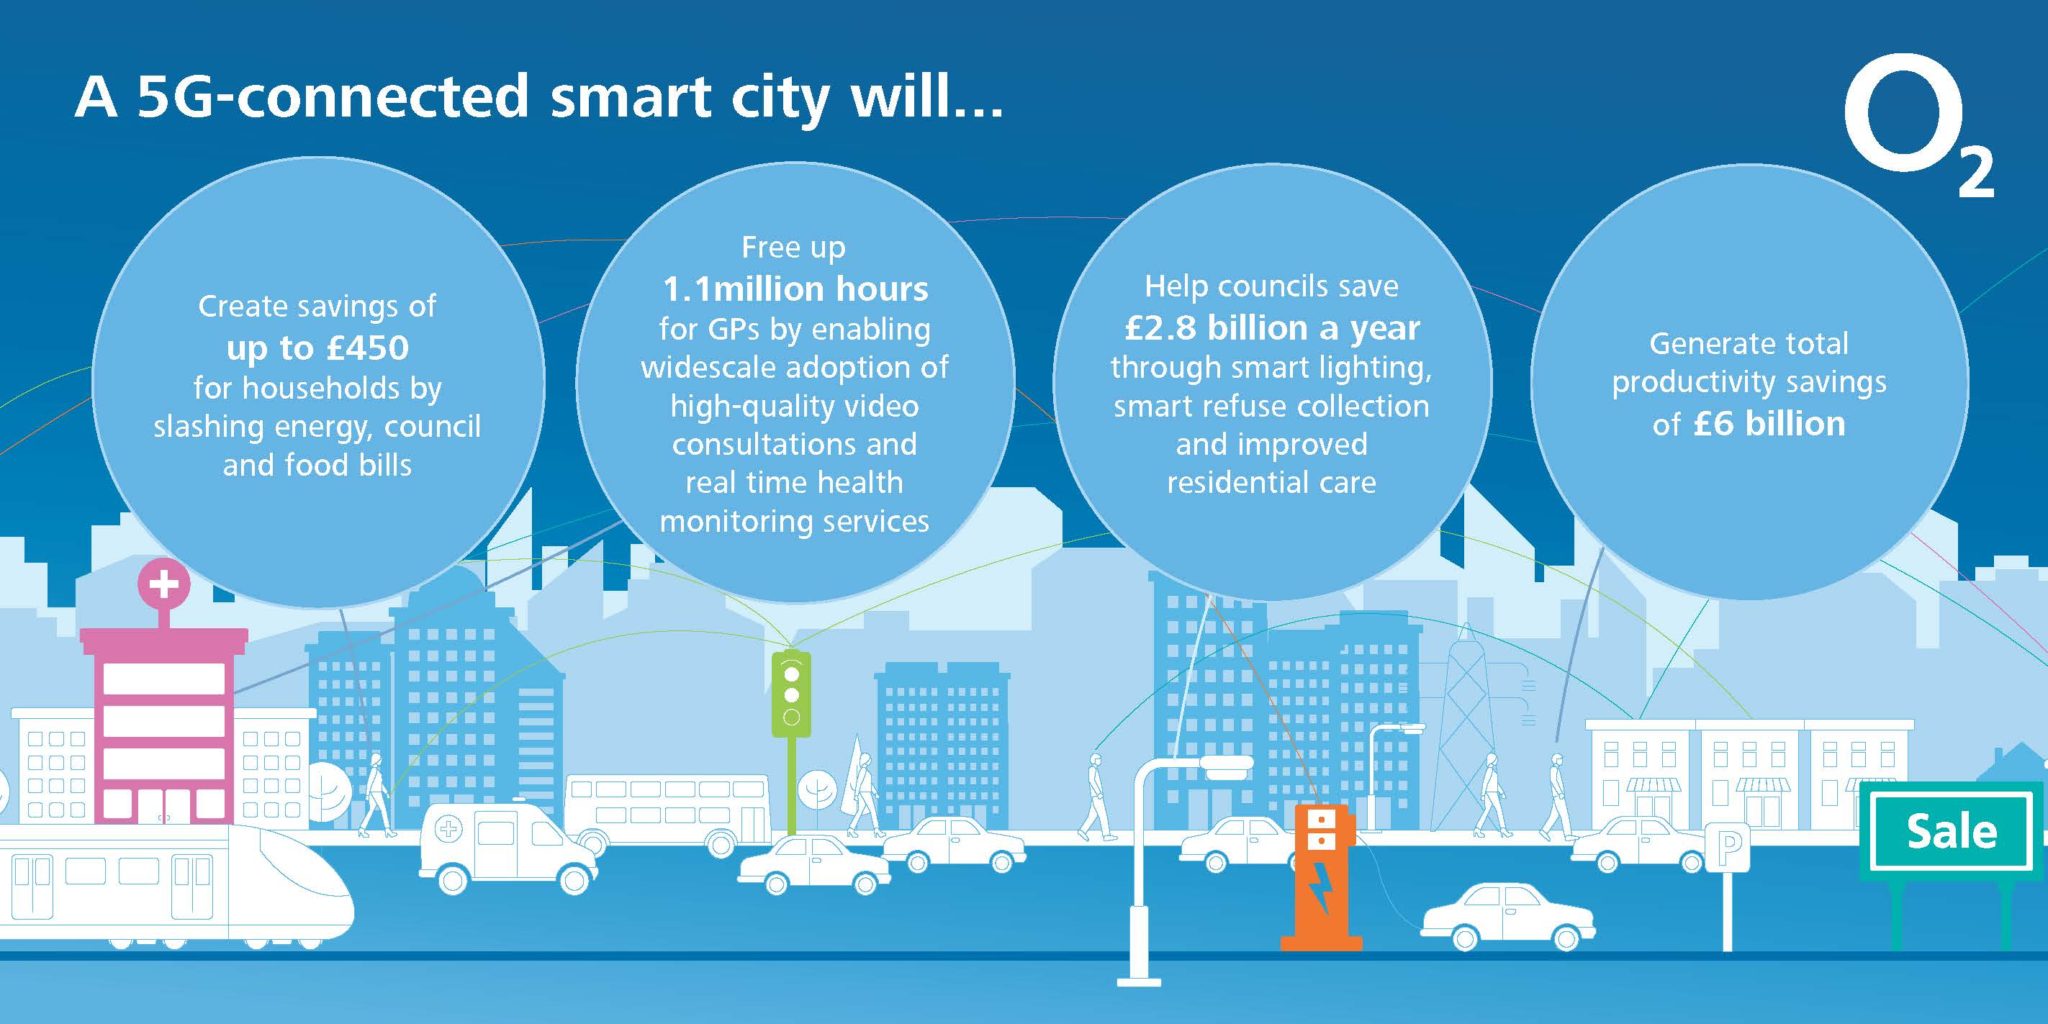 Upgrade UK cities now or miss out on productivity savings of £6 billion a year from 5G – O2